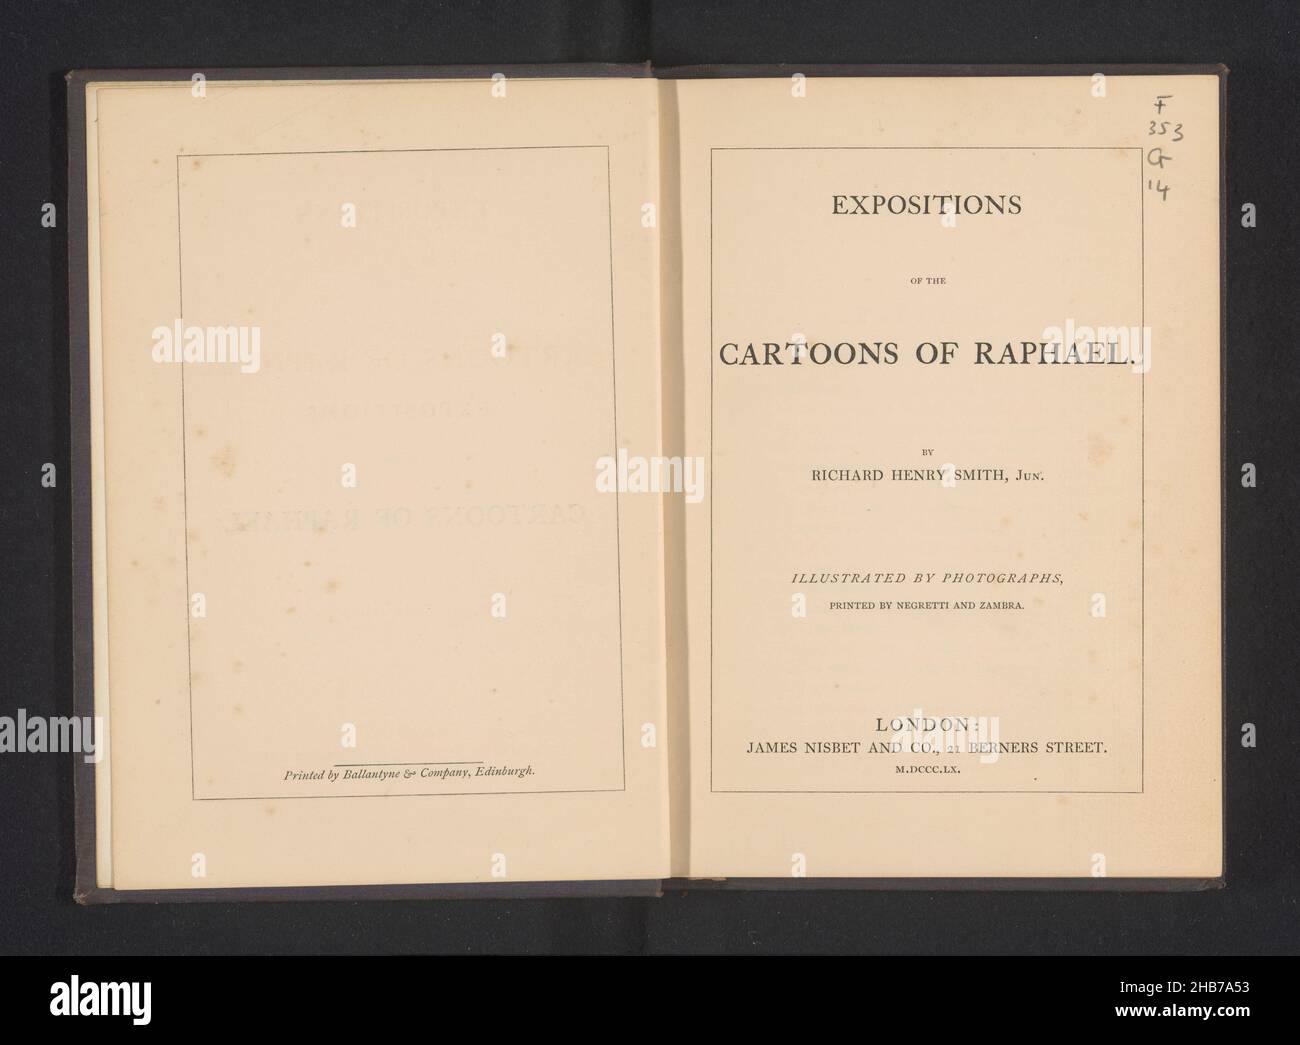 Expositions of the cartoons of Raphael, Richard Henry Smith, (mentioned on object), publisher: James Nisbet, (mentioned on object), London, 1860, paper, linen (material), printing, albumen print, height 211 mm × width 151 mm × thickness 13 mm Stock Photo